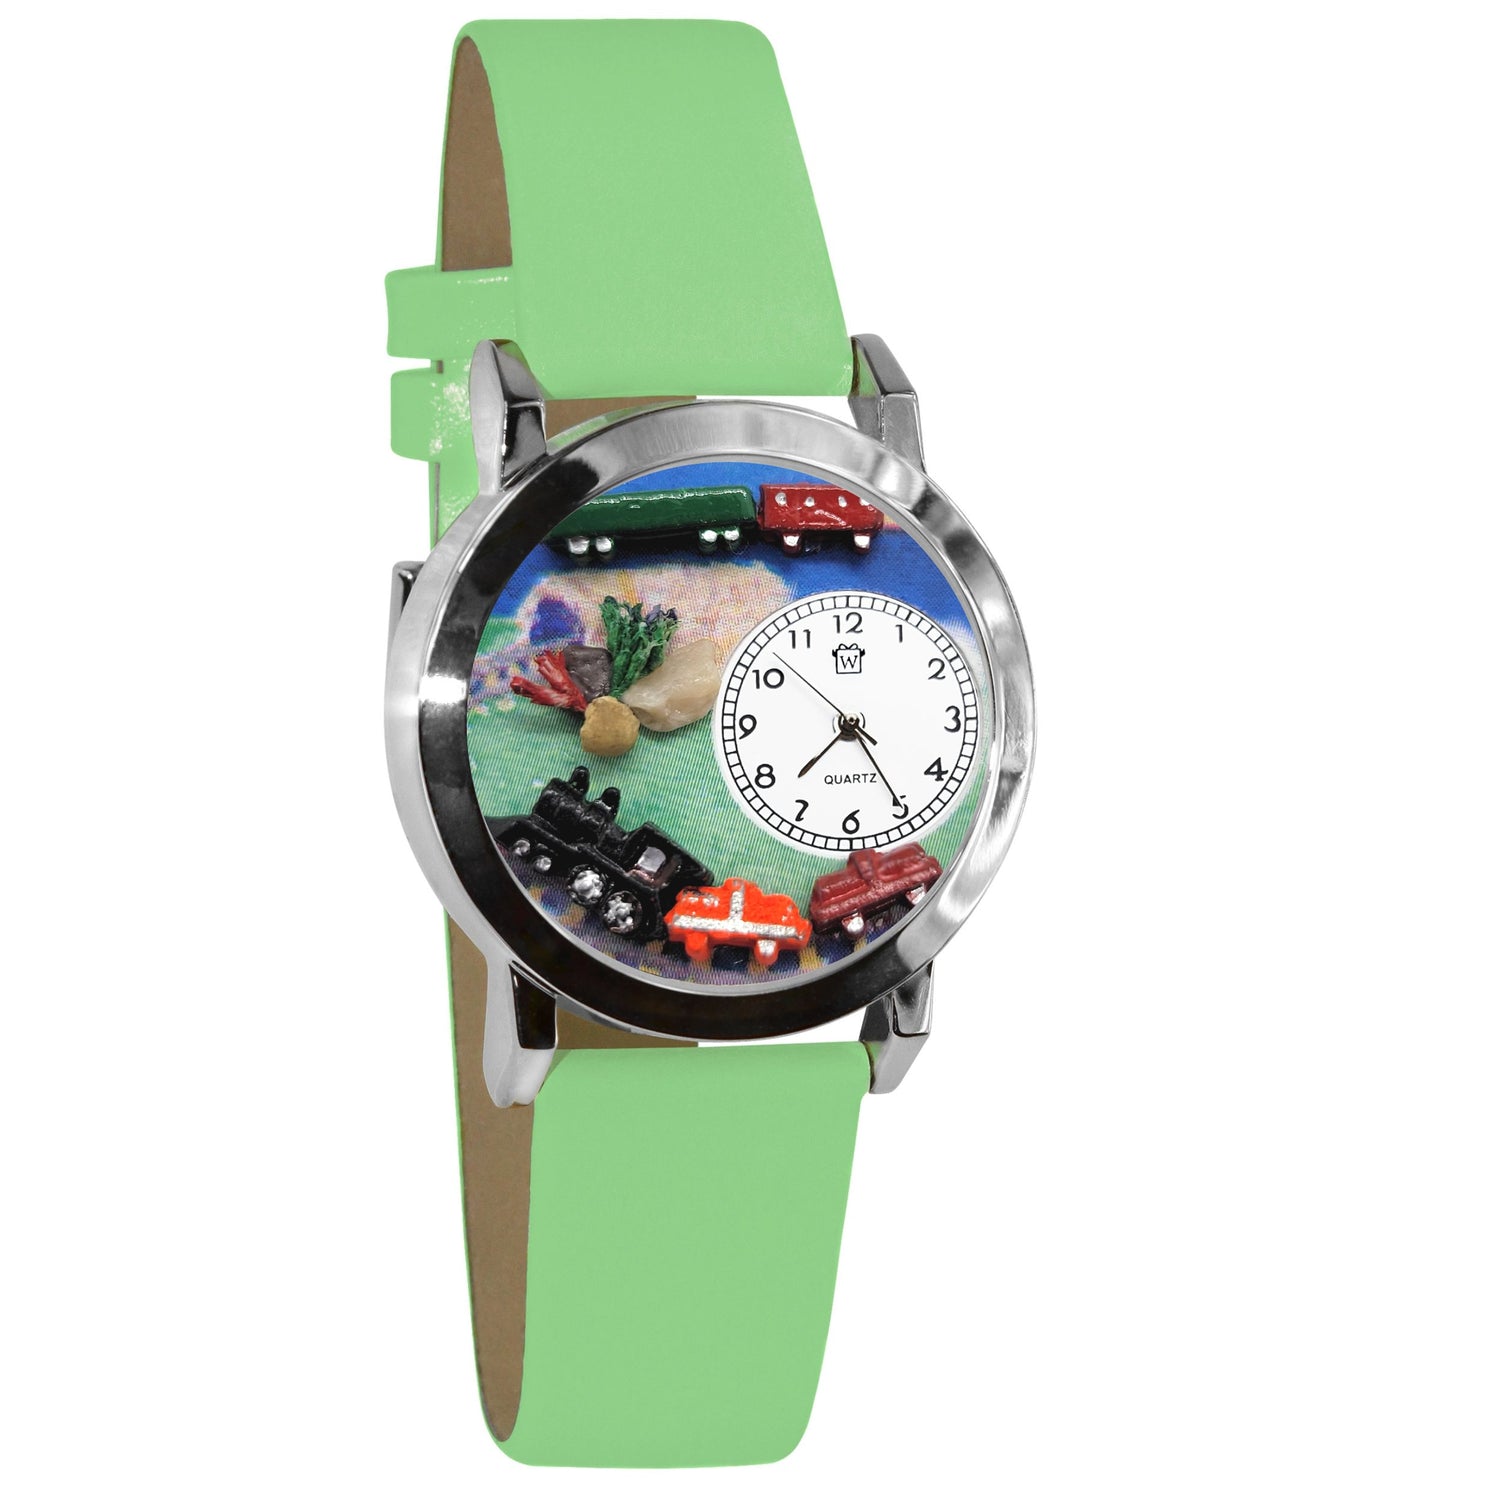 Whimsical Gifts | Trains 3D Watch Small Style | Handmade in USA | Youth Themed |  | Novelty Unique Fun Miniatures Gift | Silver Finish Green Leather Watch Band